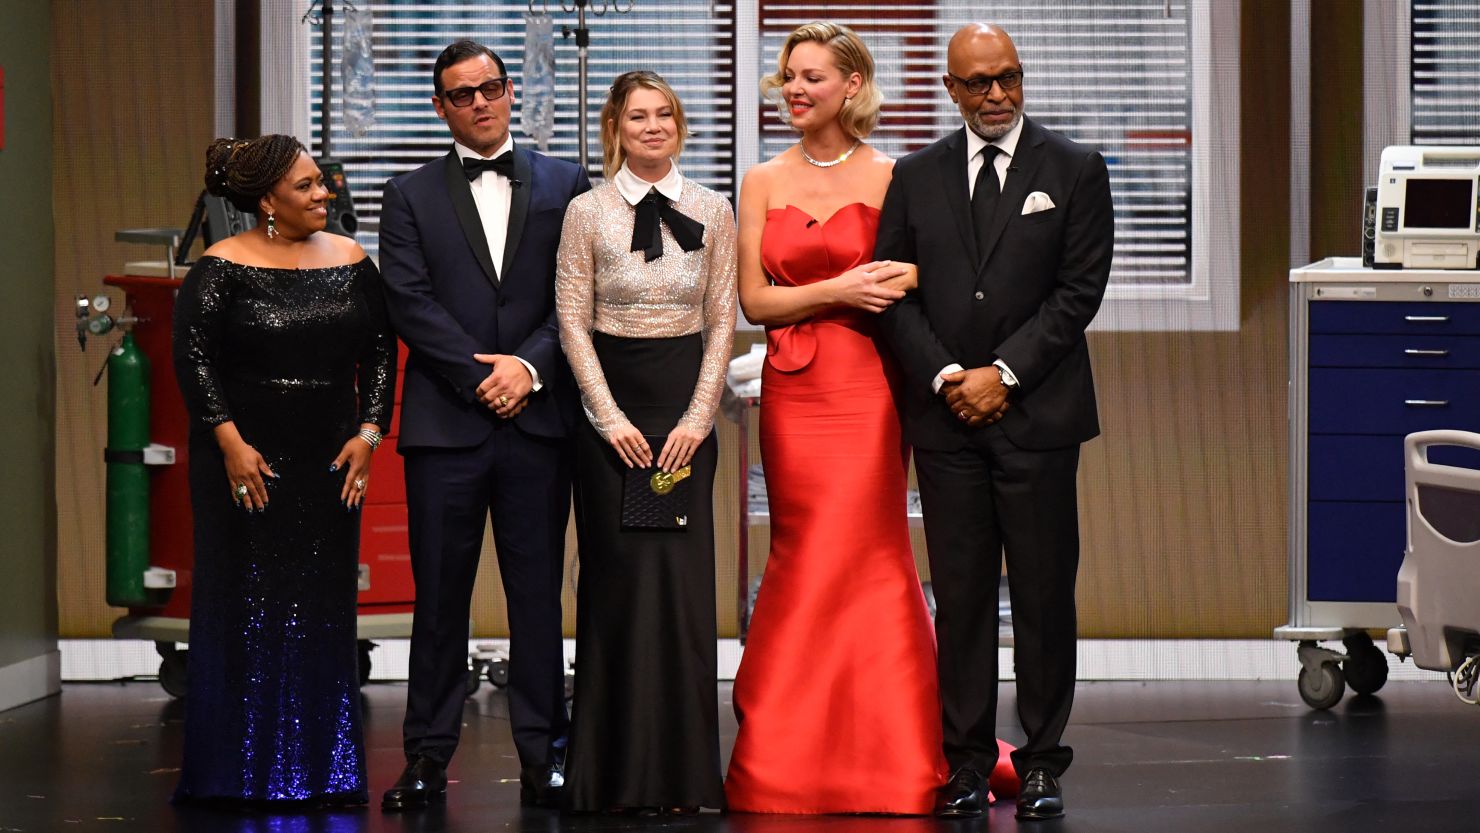 (L-R) Actors Chandra Wilson, Justin Chambers, Ellen Pompeo, Katherine Heigl and James Pickens speak  onstage during the 75th Emmy Awards at the Peacock Theatre at L.A. Live in Los Angeles on January 15, 2024. (Photo by Valerie Macon / AFP) (Photo by VALERIE MACON/AFP via Getty Images)